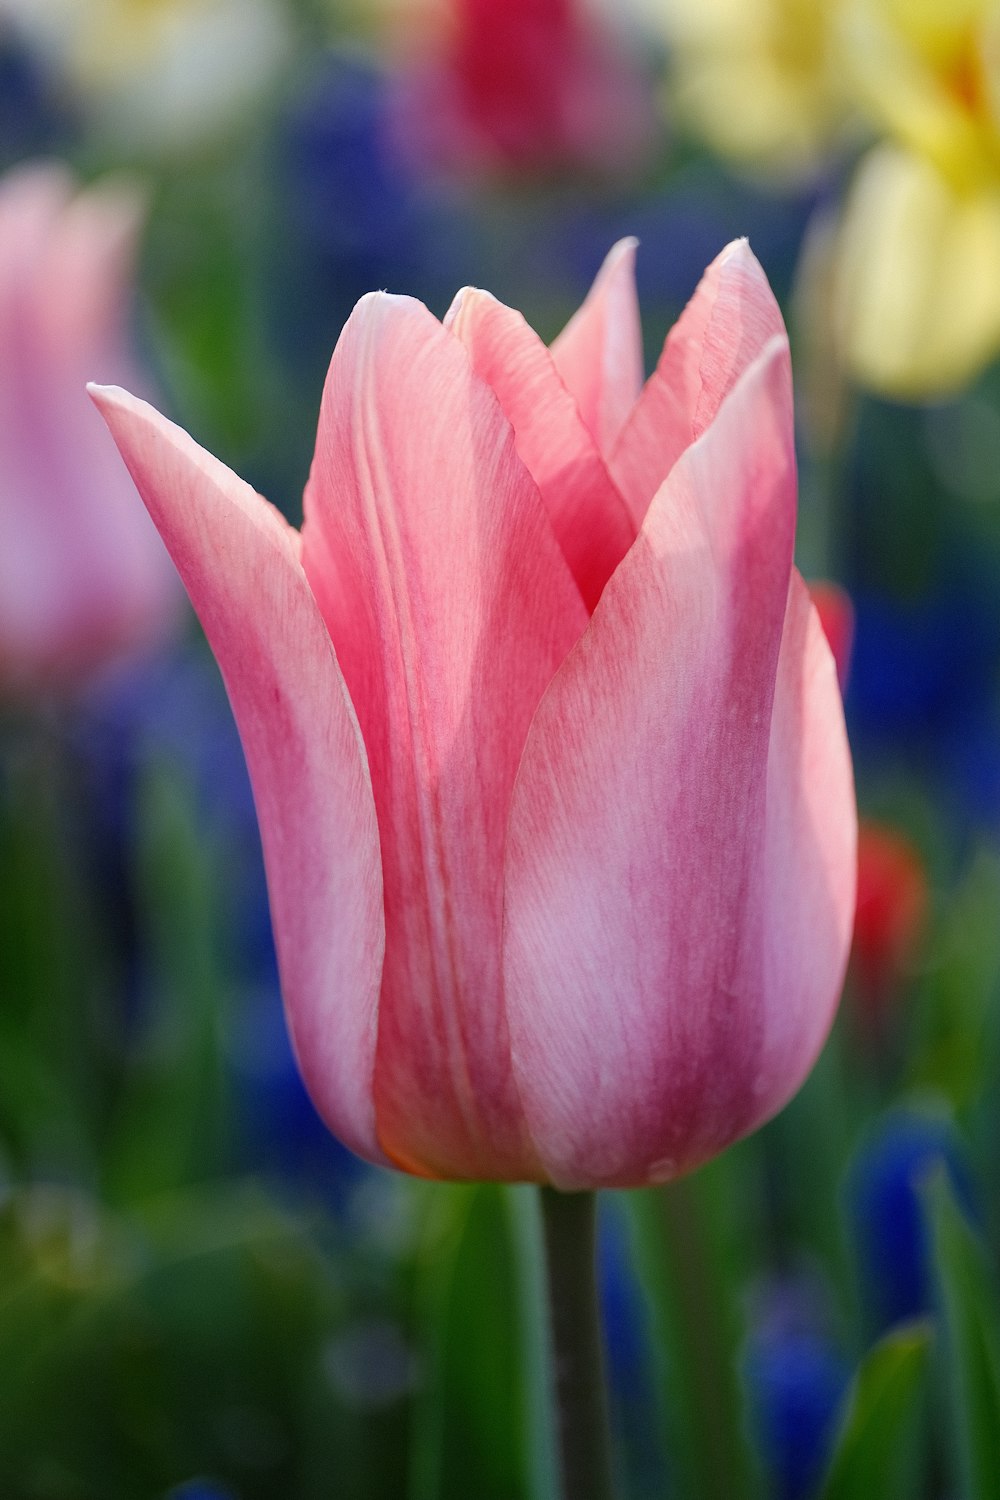 a pink tulip in a field of blue and yellow flowers